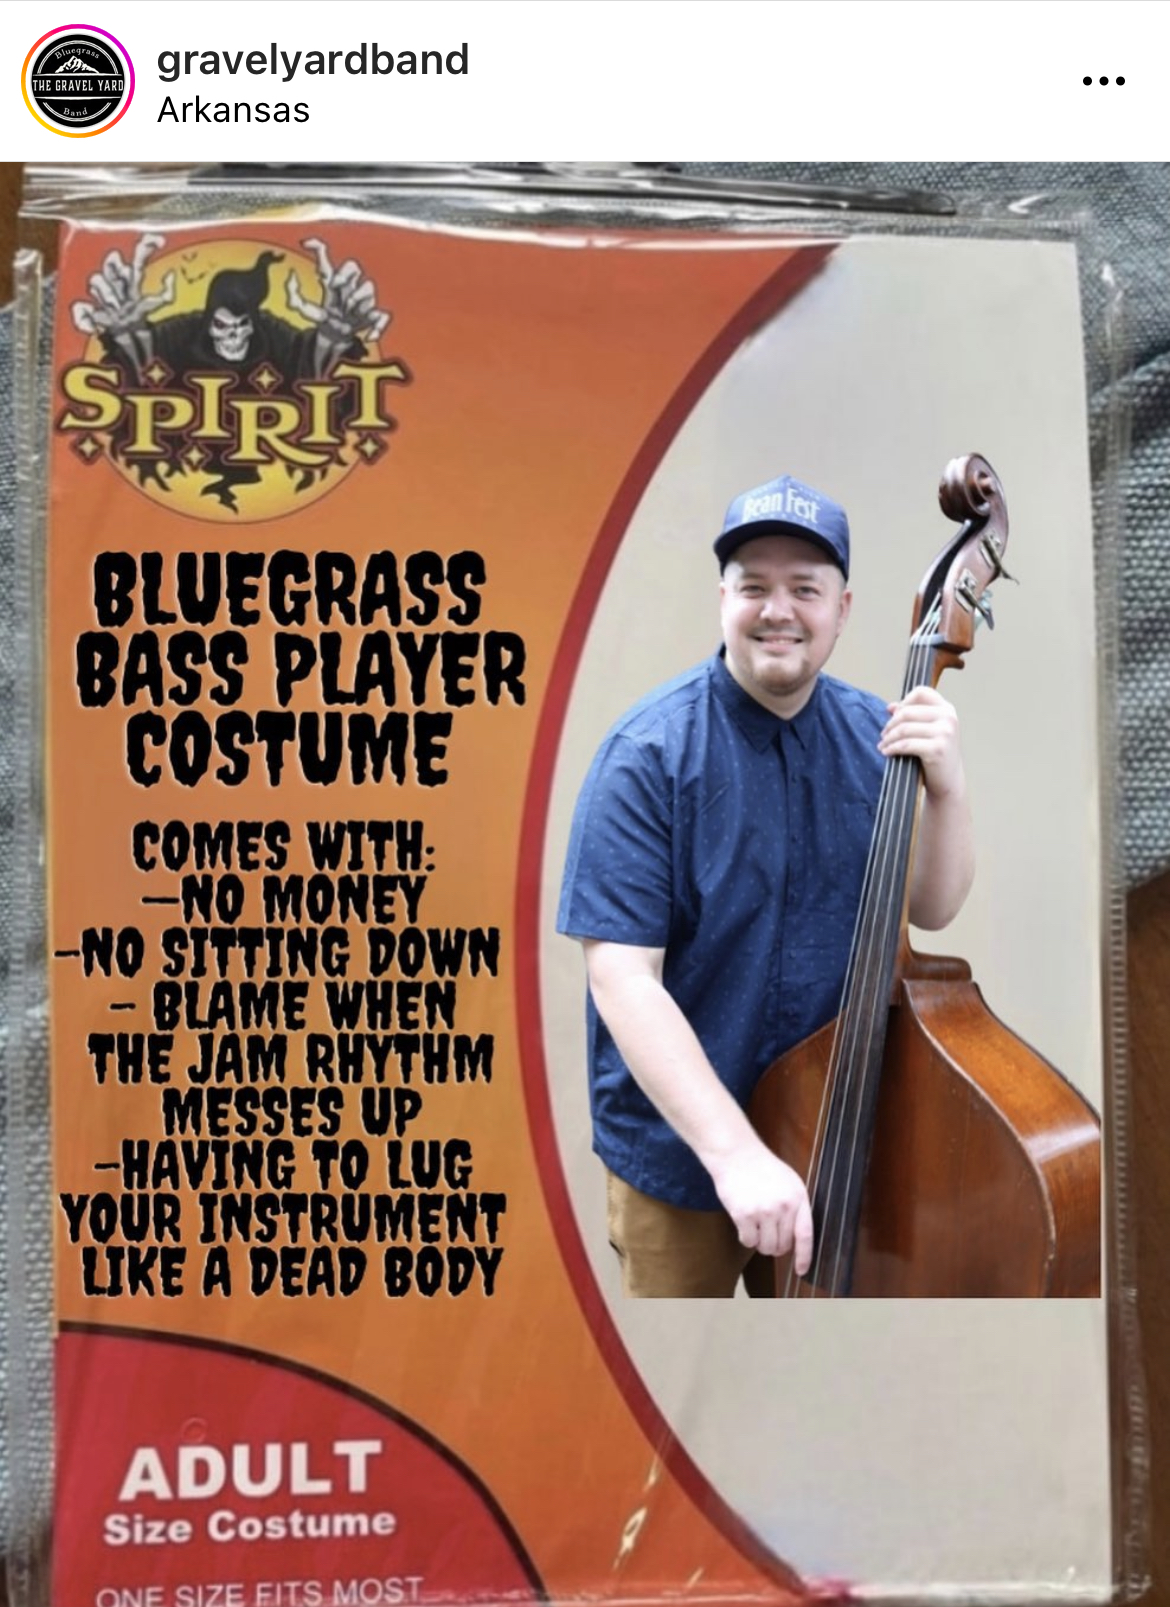 Costume Memes - Costume - Operes M gravelyardband Arkansas Spirit Bluegrass Bass Player Costume Comes With No Money No Sitting Down Blame When The Jam Rhythm Messes Up Having To Lug Your Instrument A Dead Body Adult Size Costume One Size Fits Most